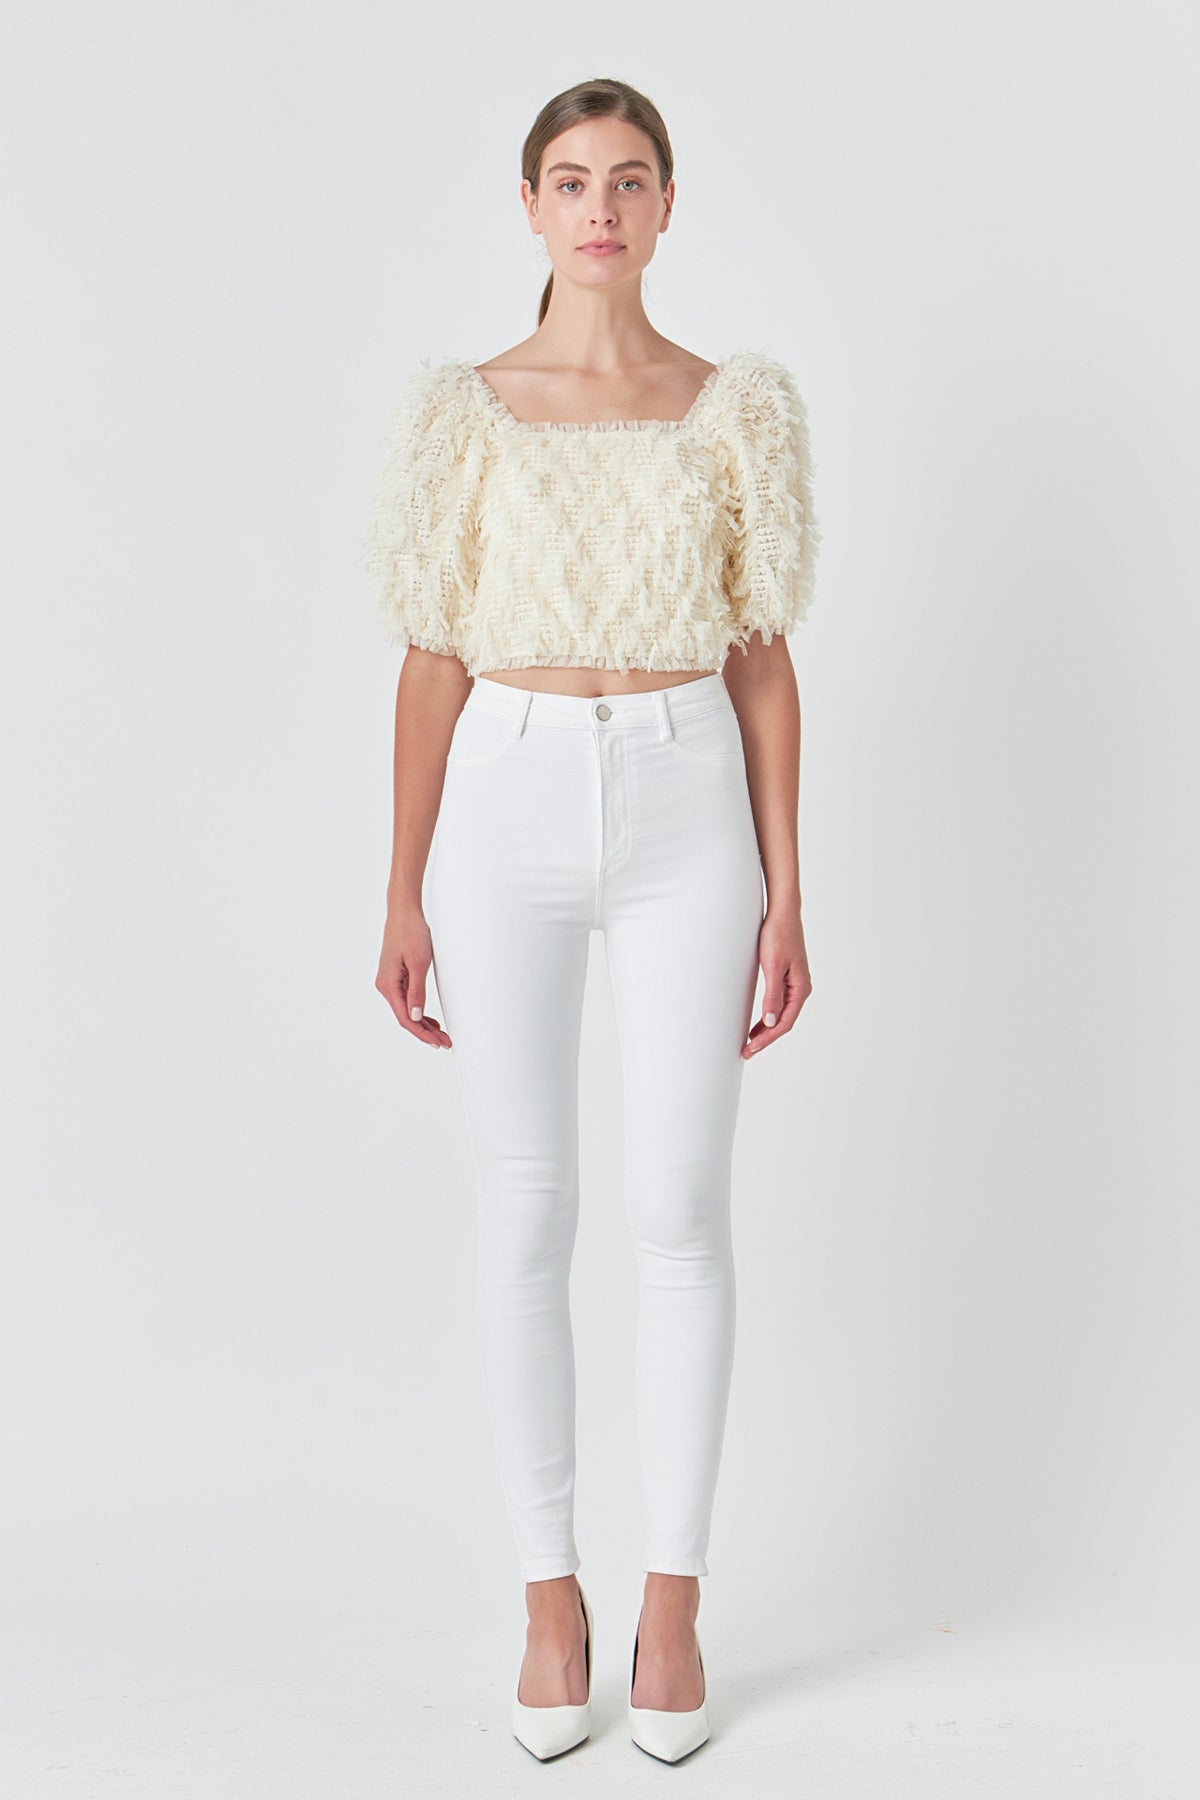 ENDLESS ROSE - Mesh Trimmed Puff Sleeve Top - TOPS available at Objectrare